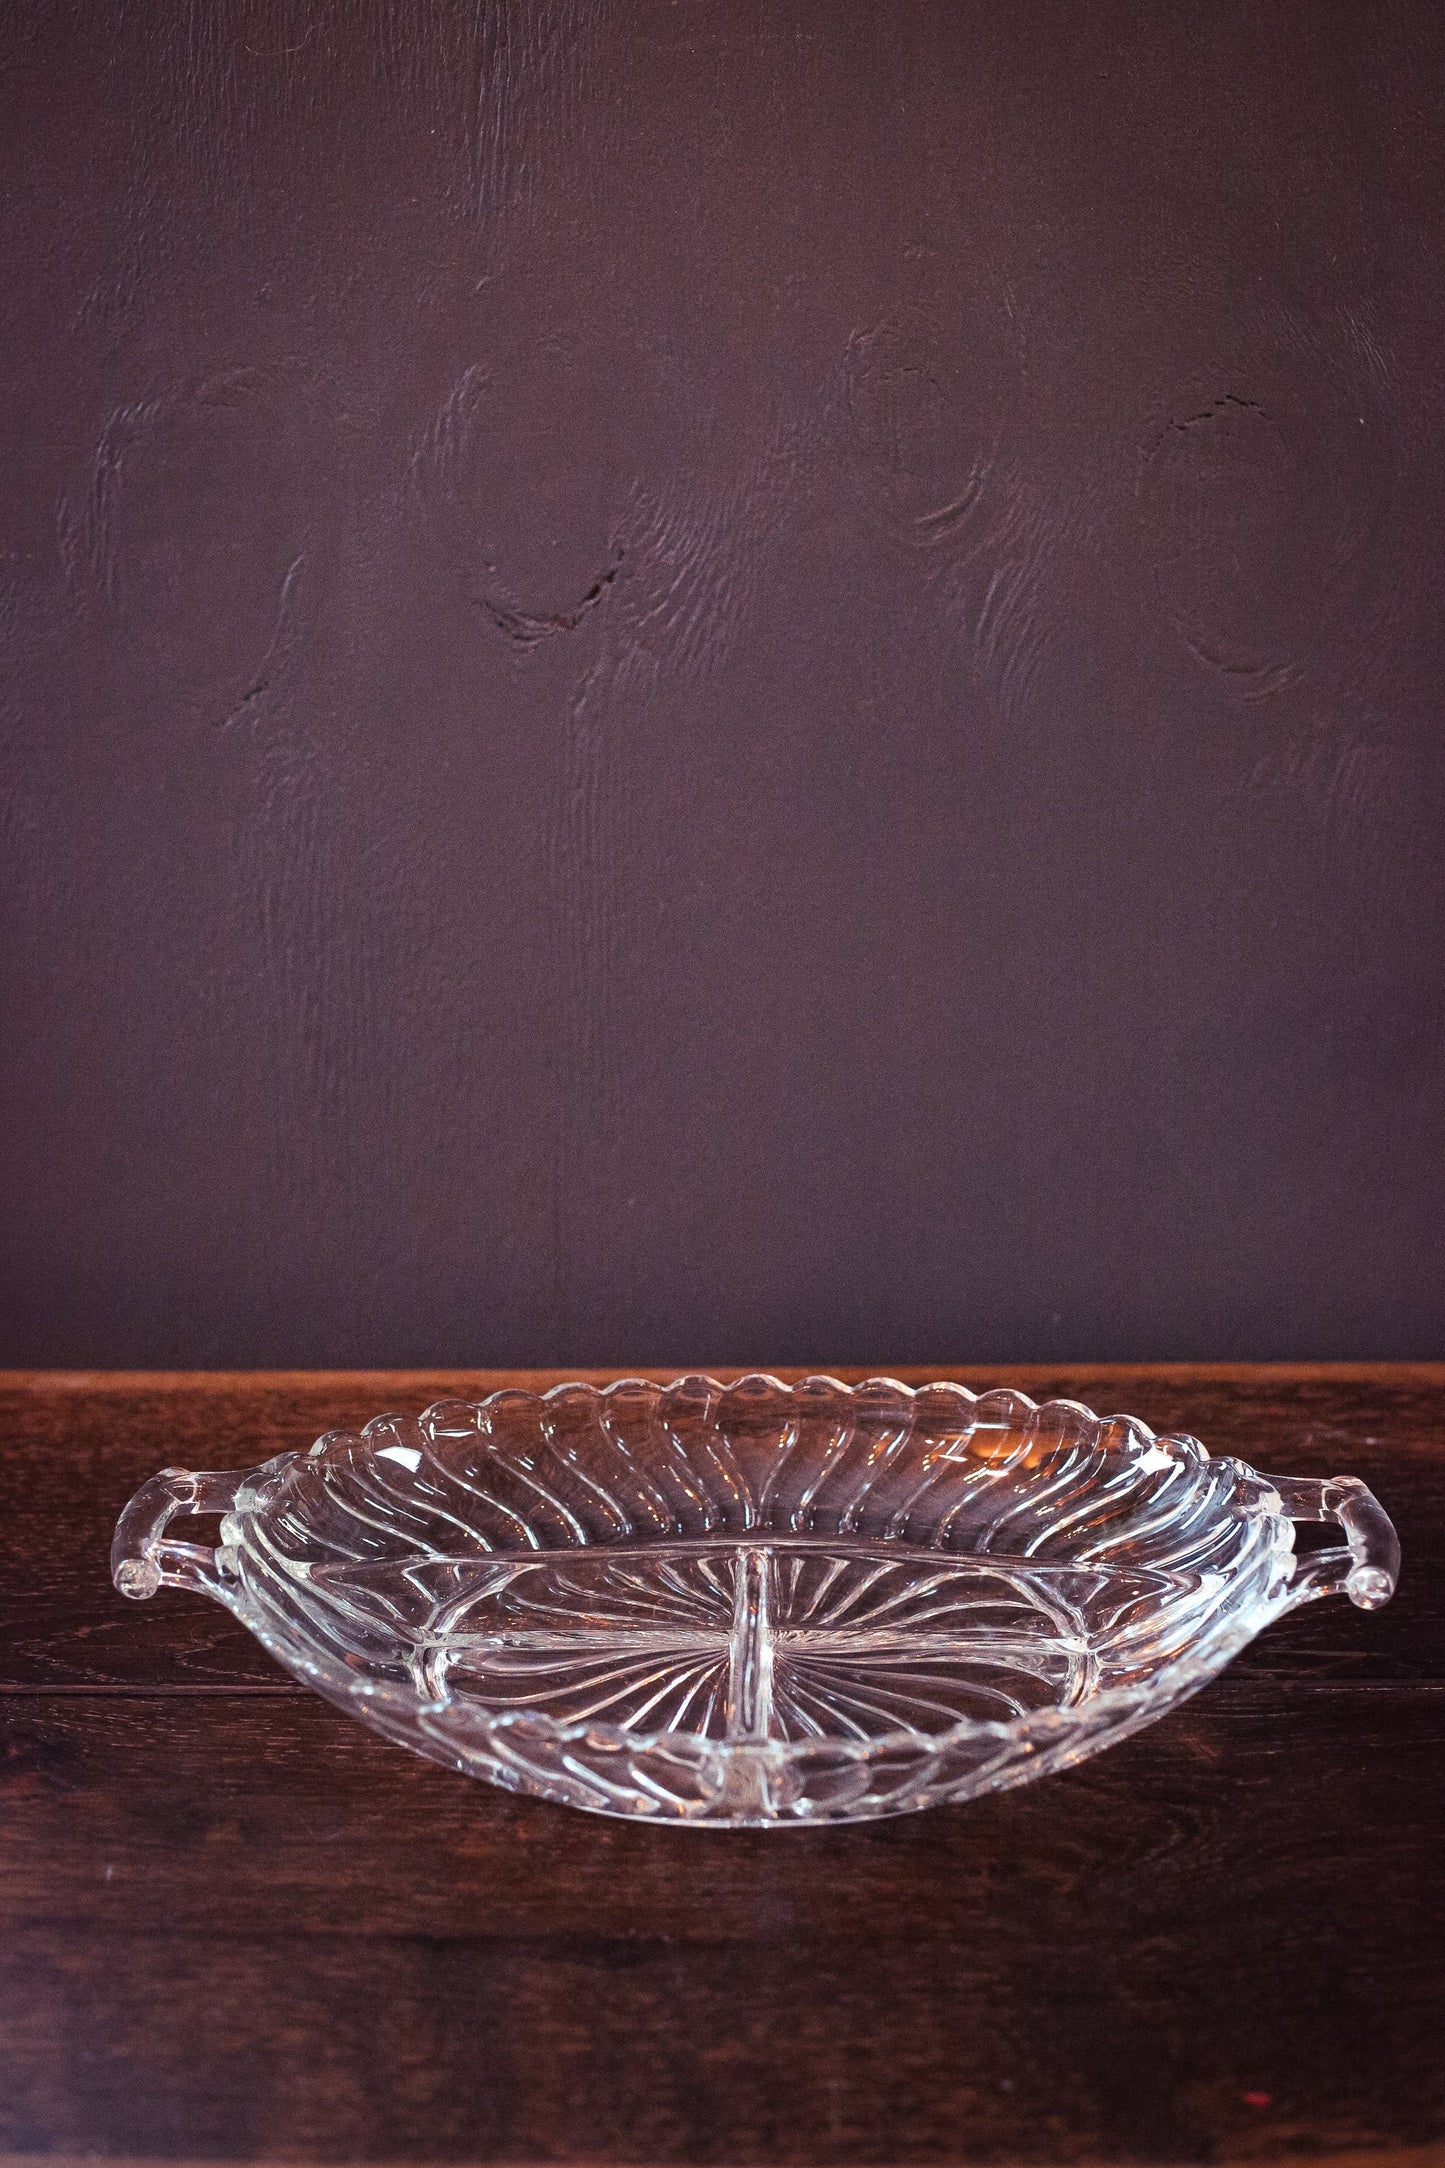 Divided Crystal Serving Platter with Handles - Fostoria Colony Pattern Crystal Platter/Divided Relish Dish